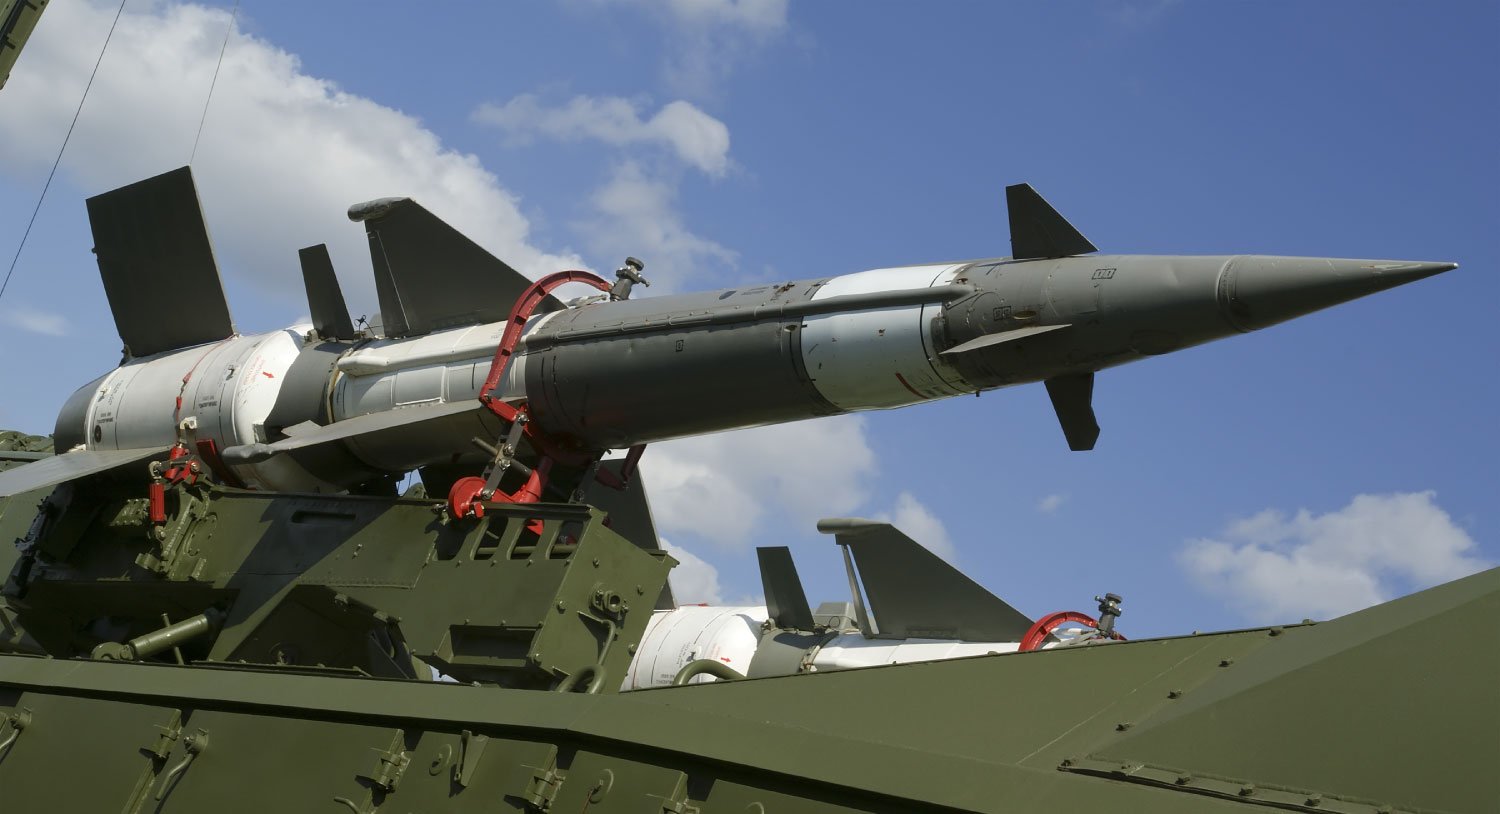 Could Putin or Biden Launch Nuclear Missiles by Themselves?